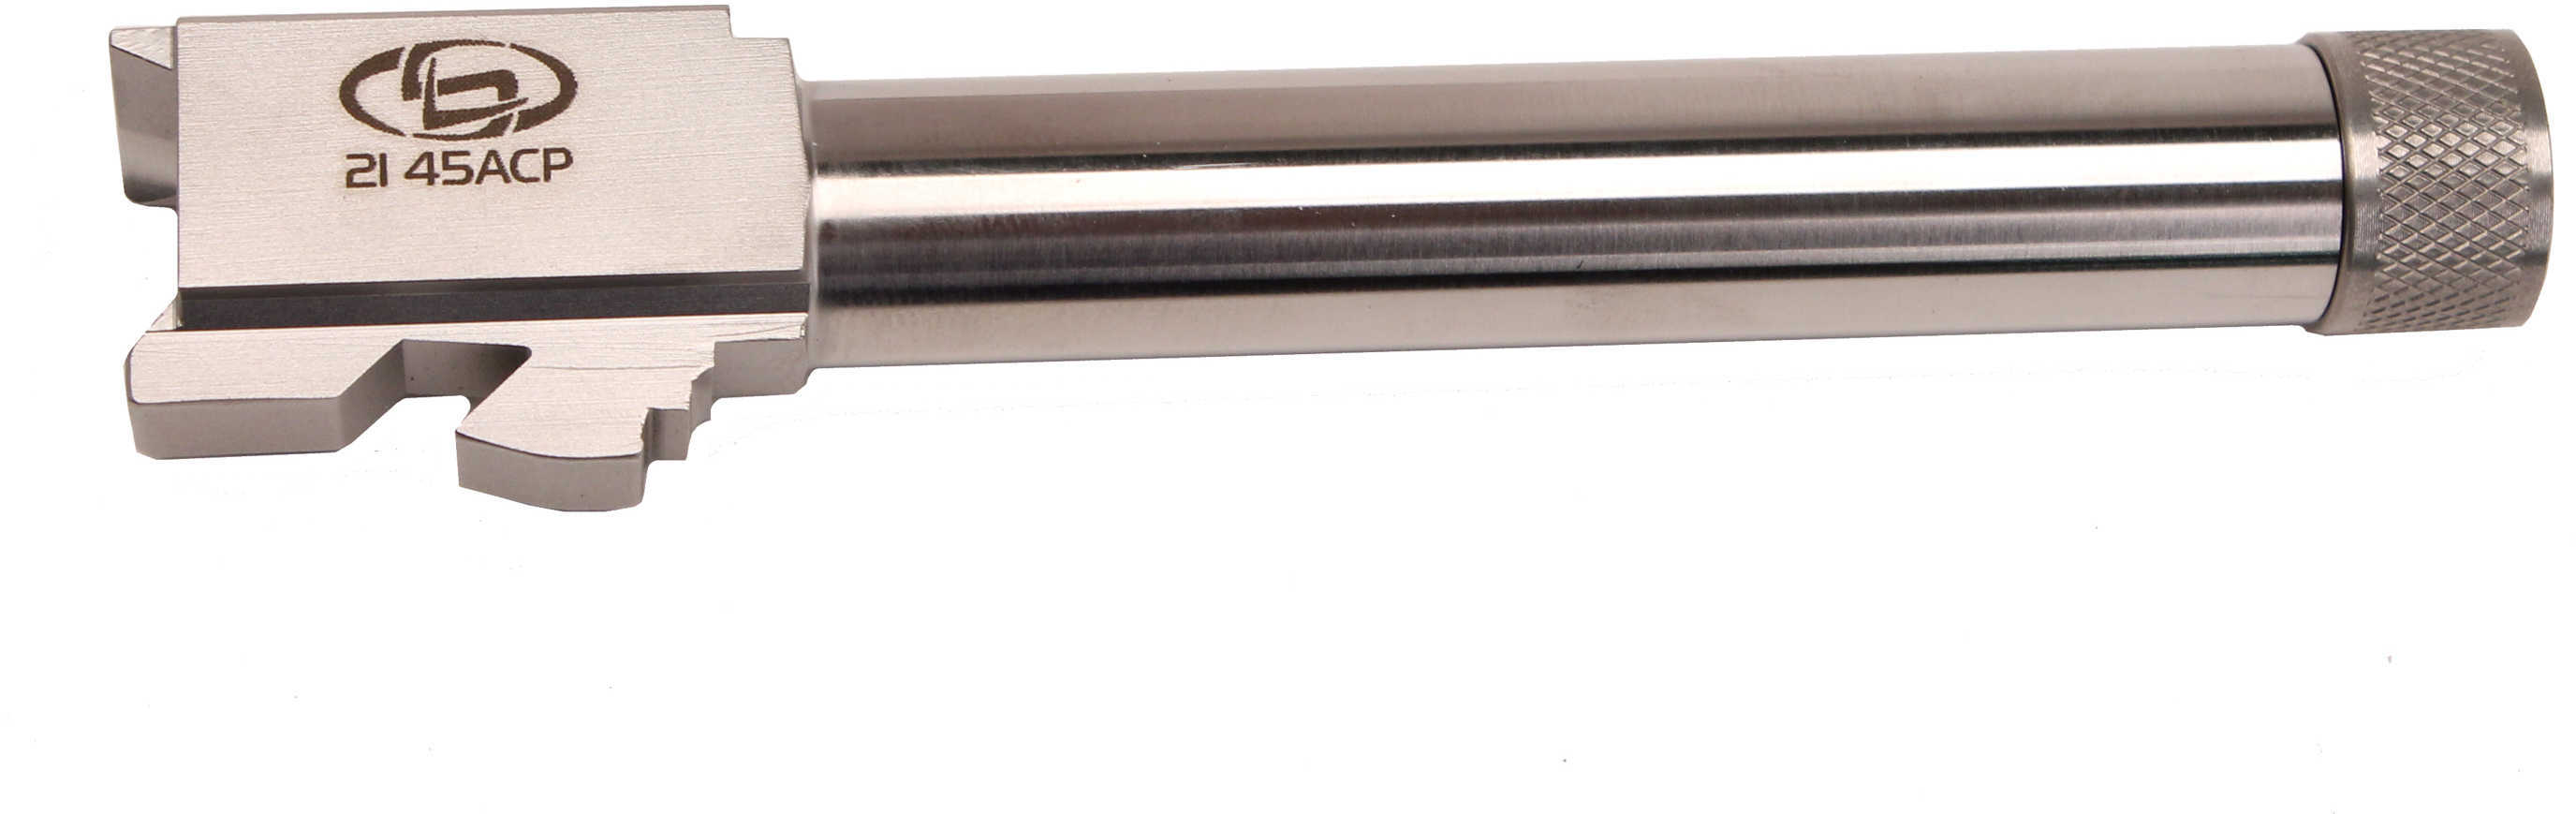 StormLake Barrels Lake 45 ACP 5.3" Fits Glock 21 Stainless Finish .578-28 Thread with Protector 34021